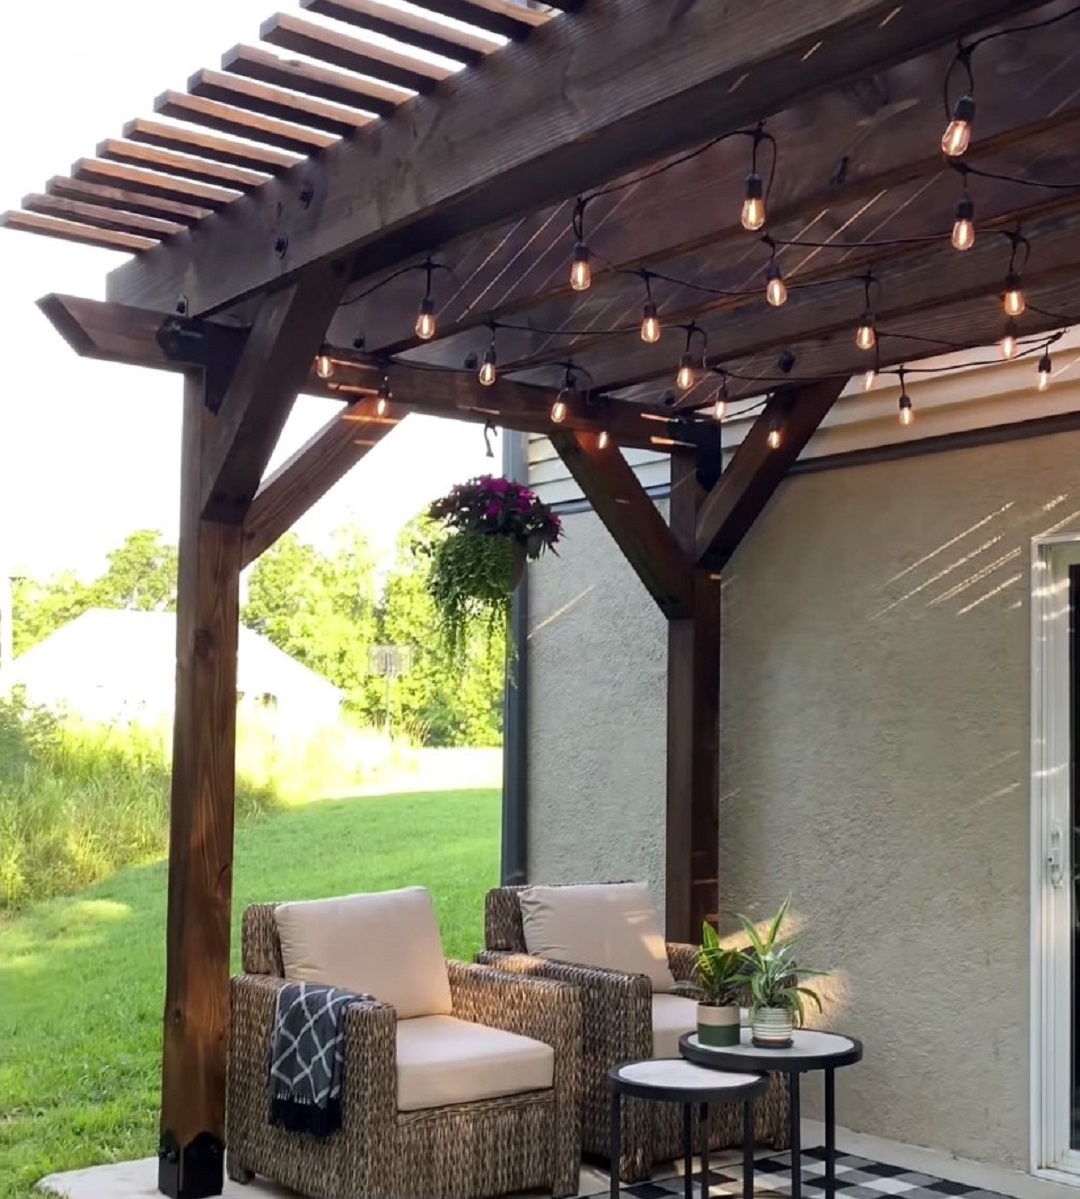 Completed Pergola built by Jen Woodhouse